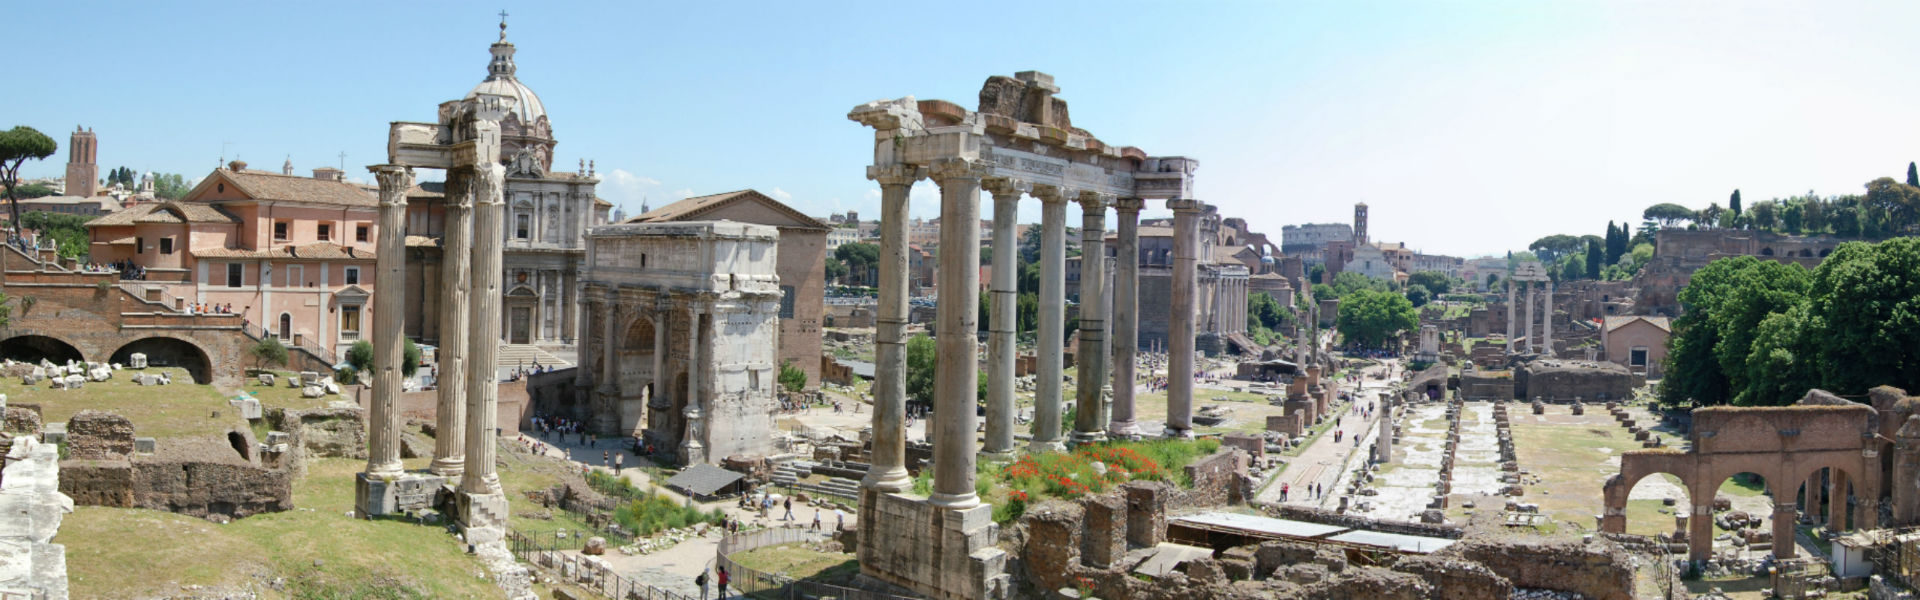 Imperial Fora, one of the world's most important archeological sites